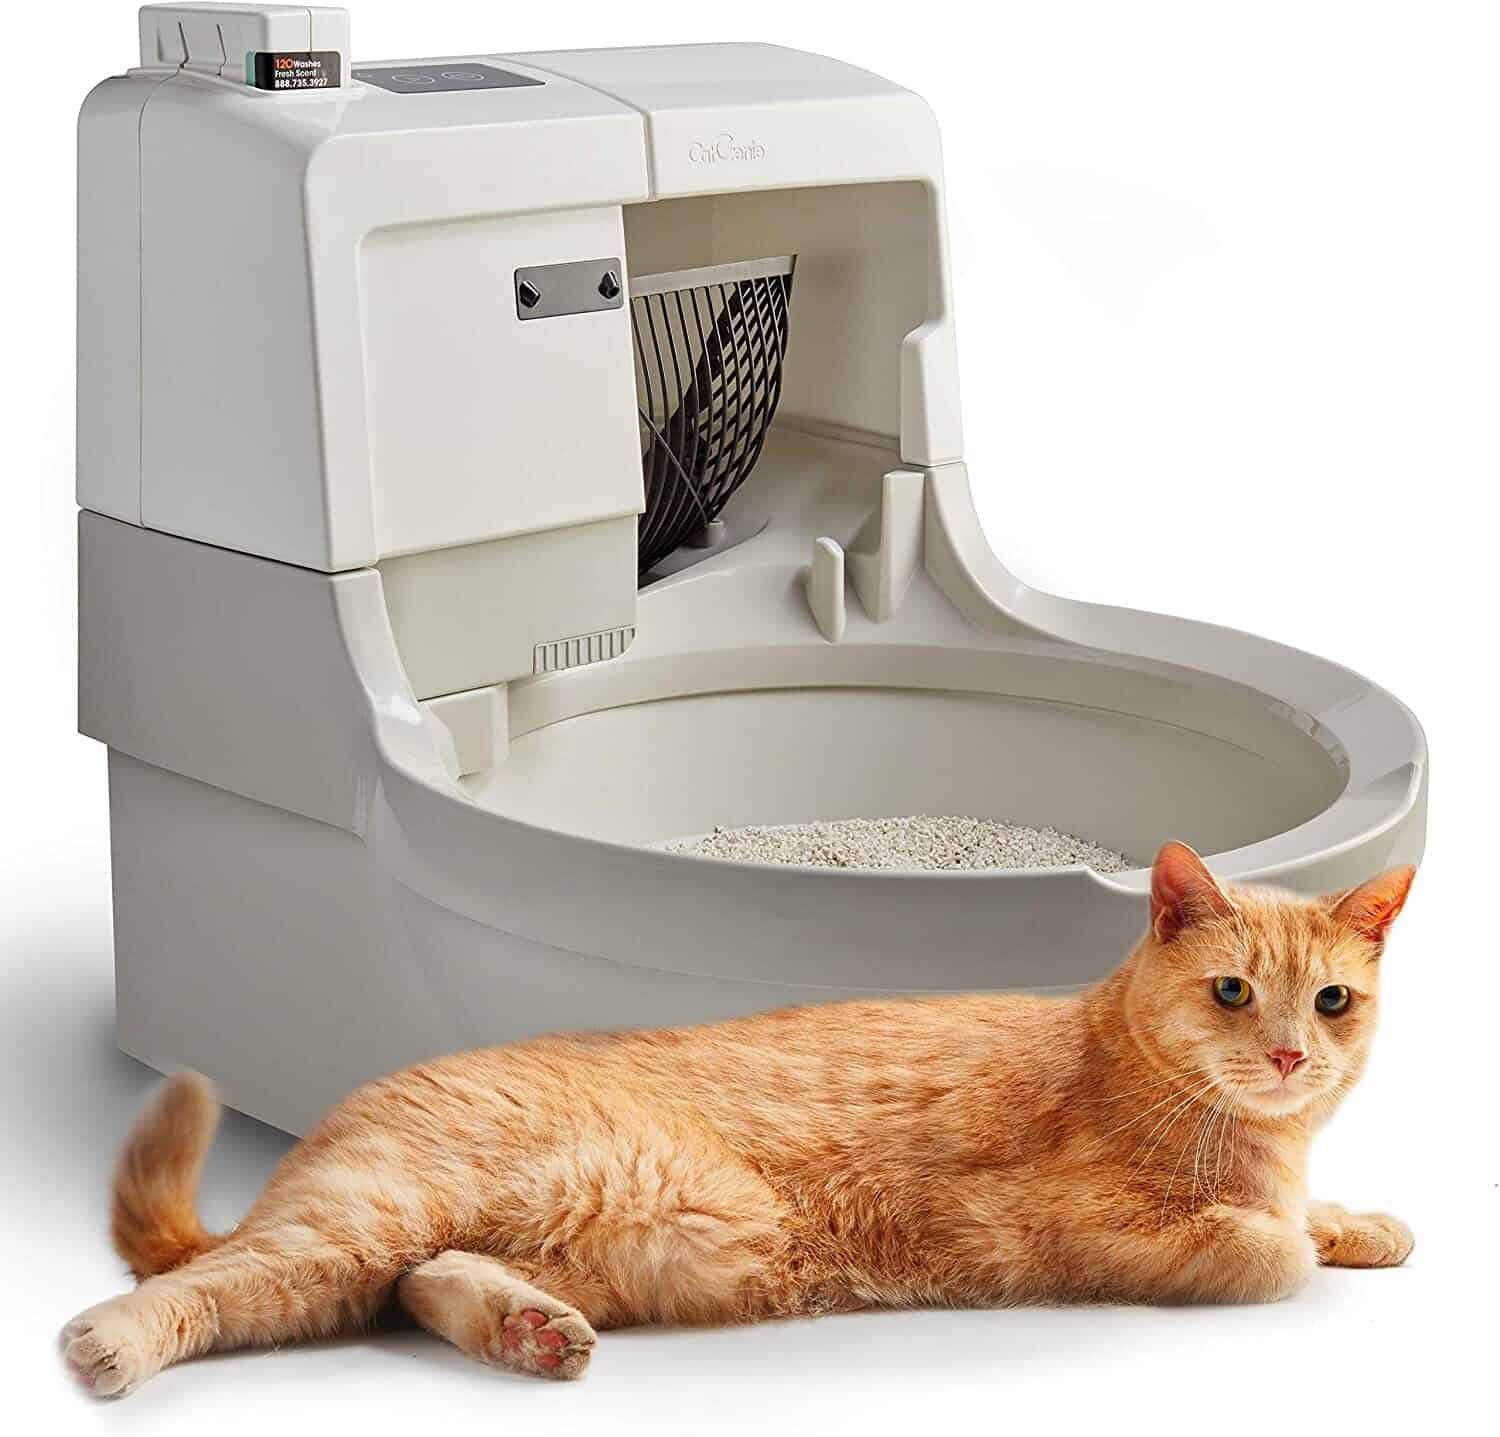 Top 7 Best Automatic Litter Box For Self Cleaning [2020 Update] 8